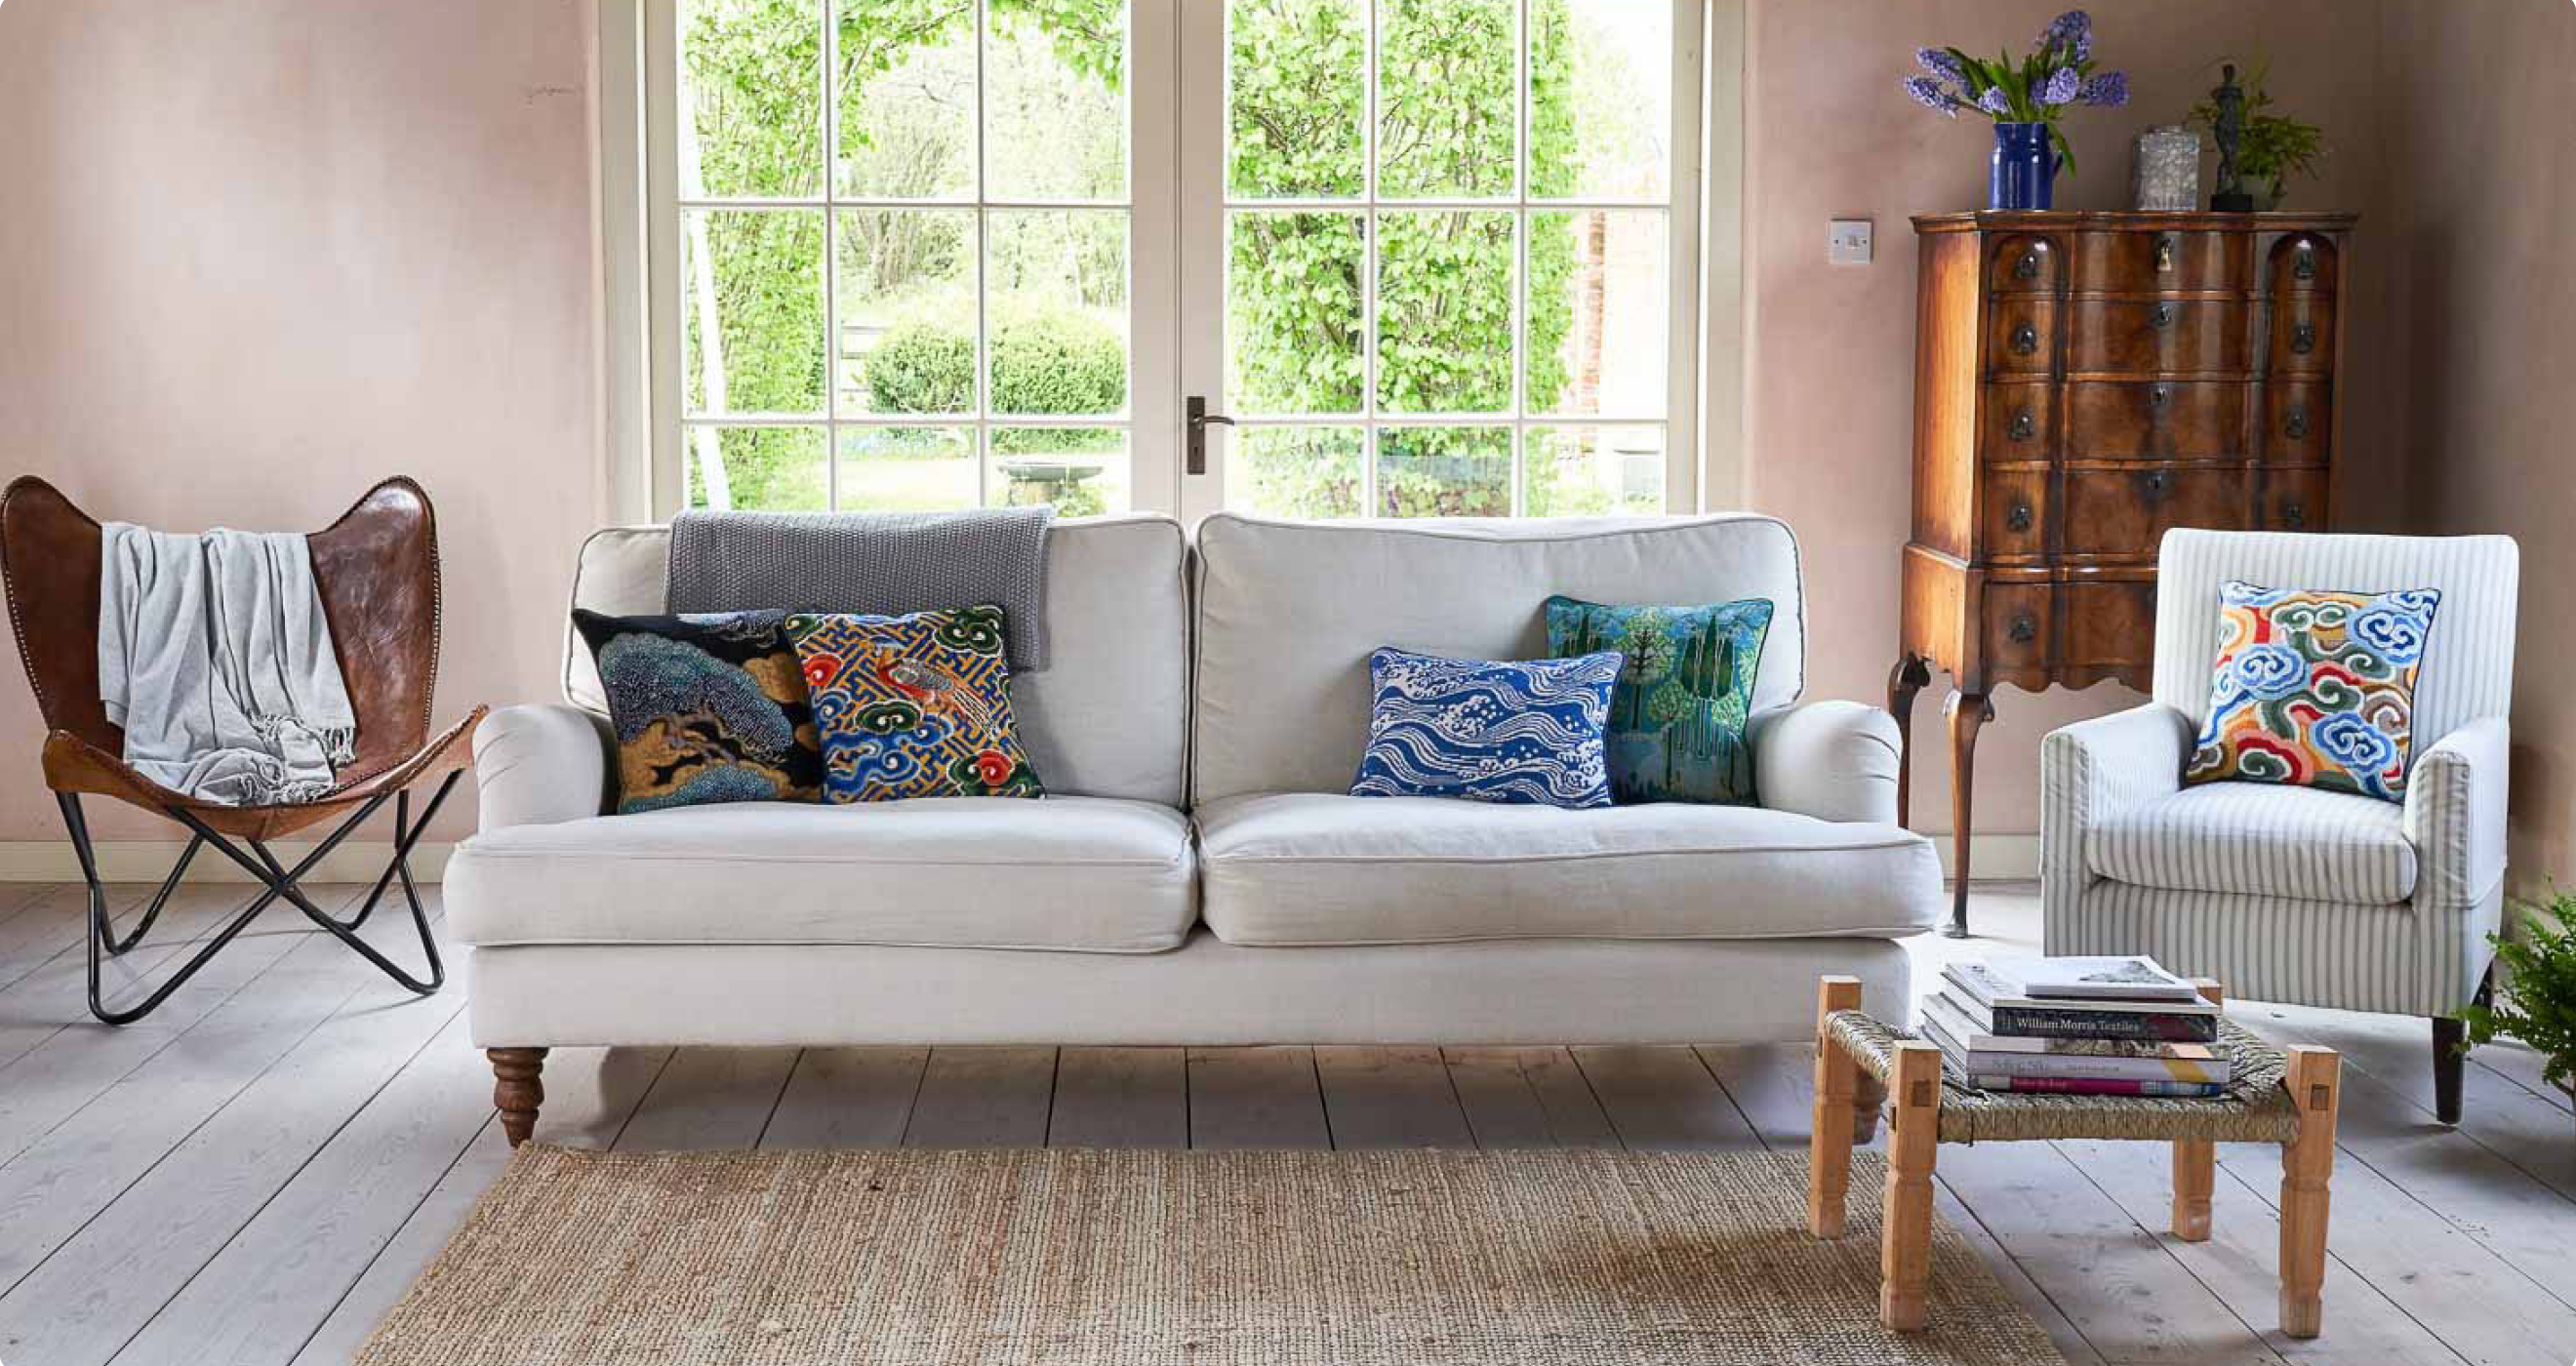 Ehrman Tapestry lifestyle with cushions on furniture